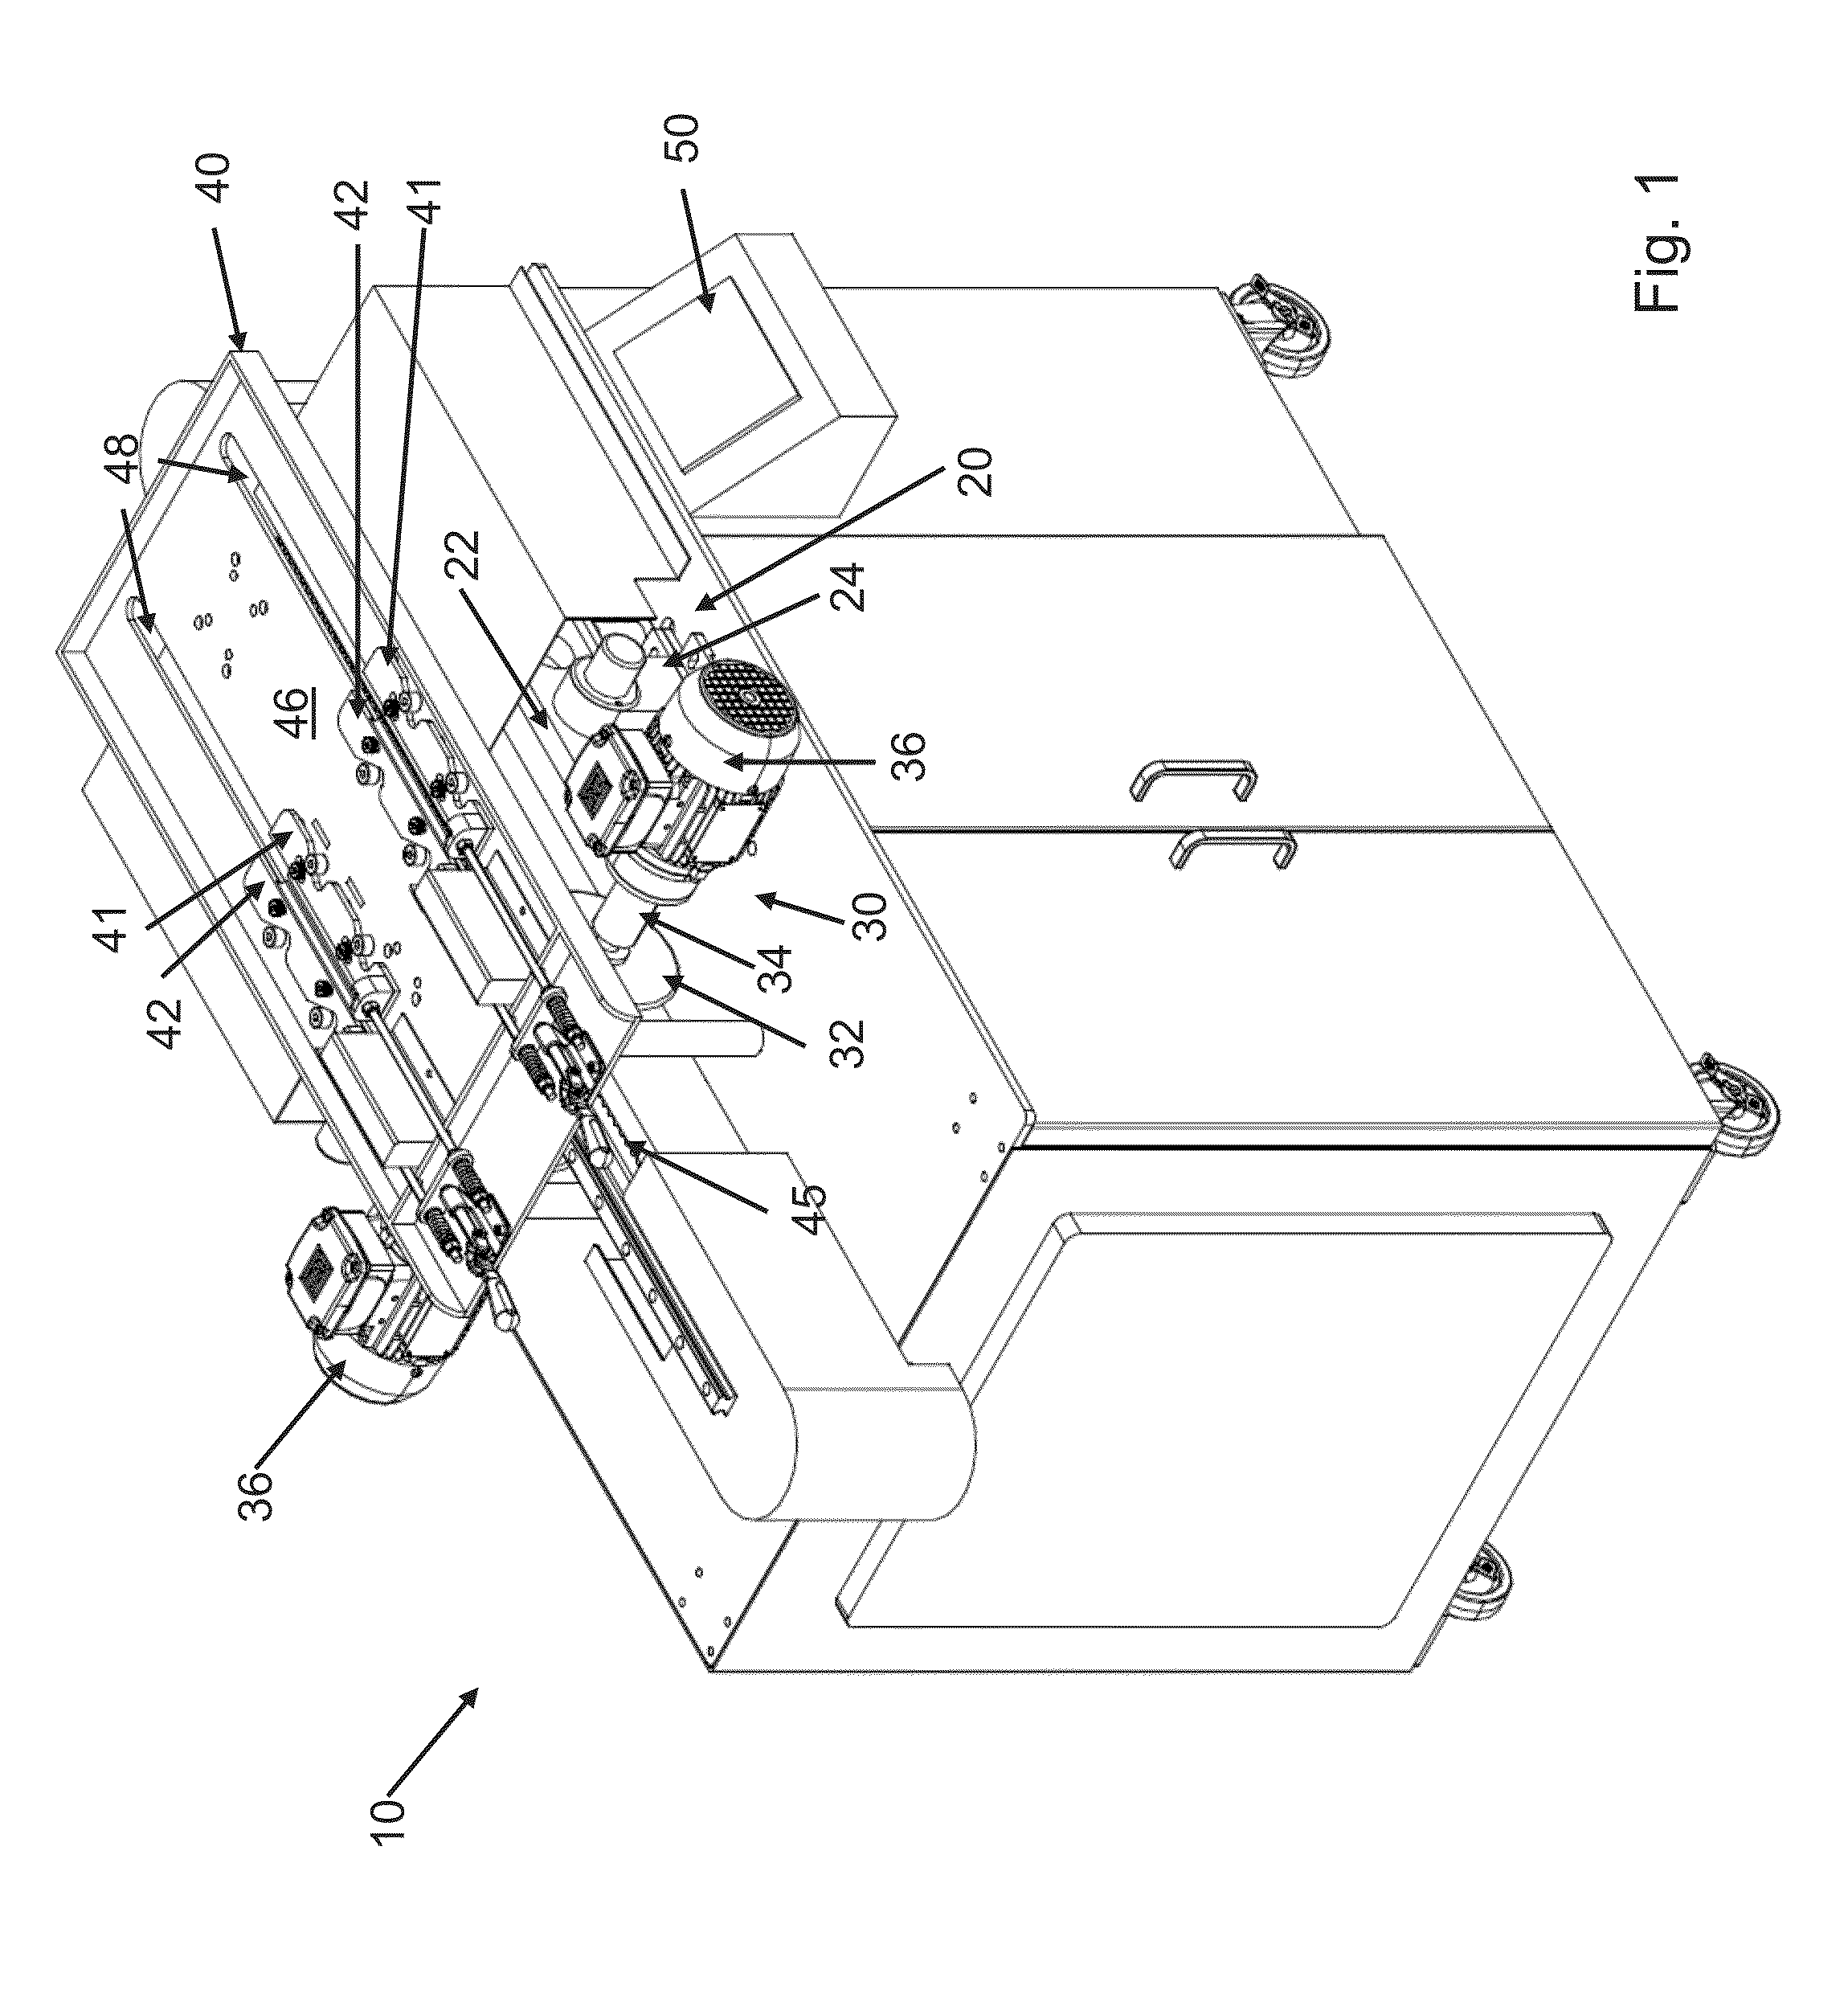 Blade sharpening system and method of using the same